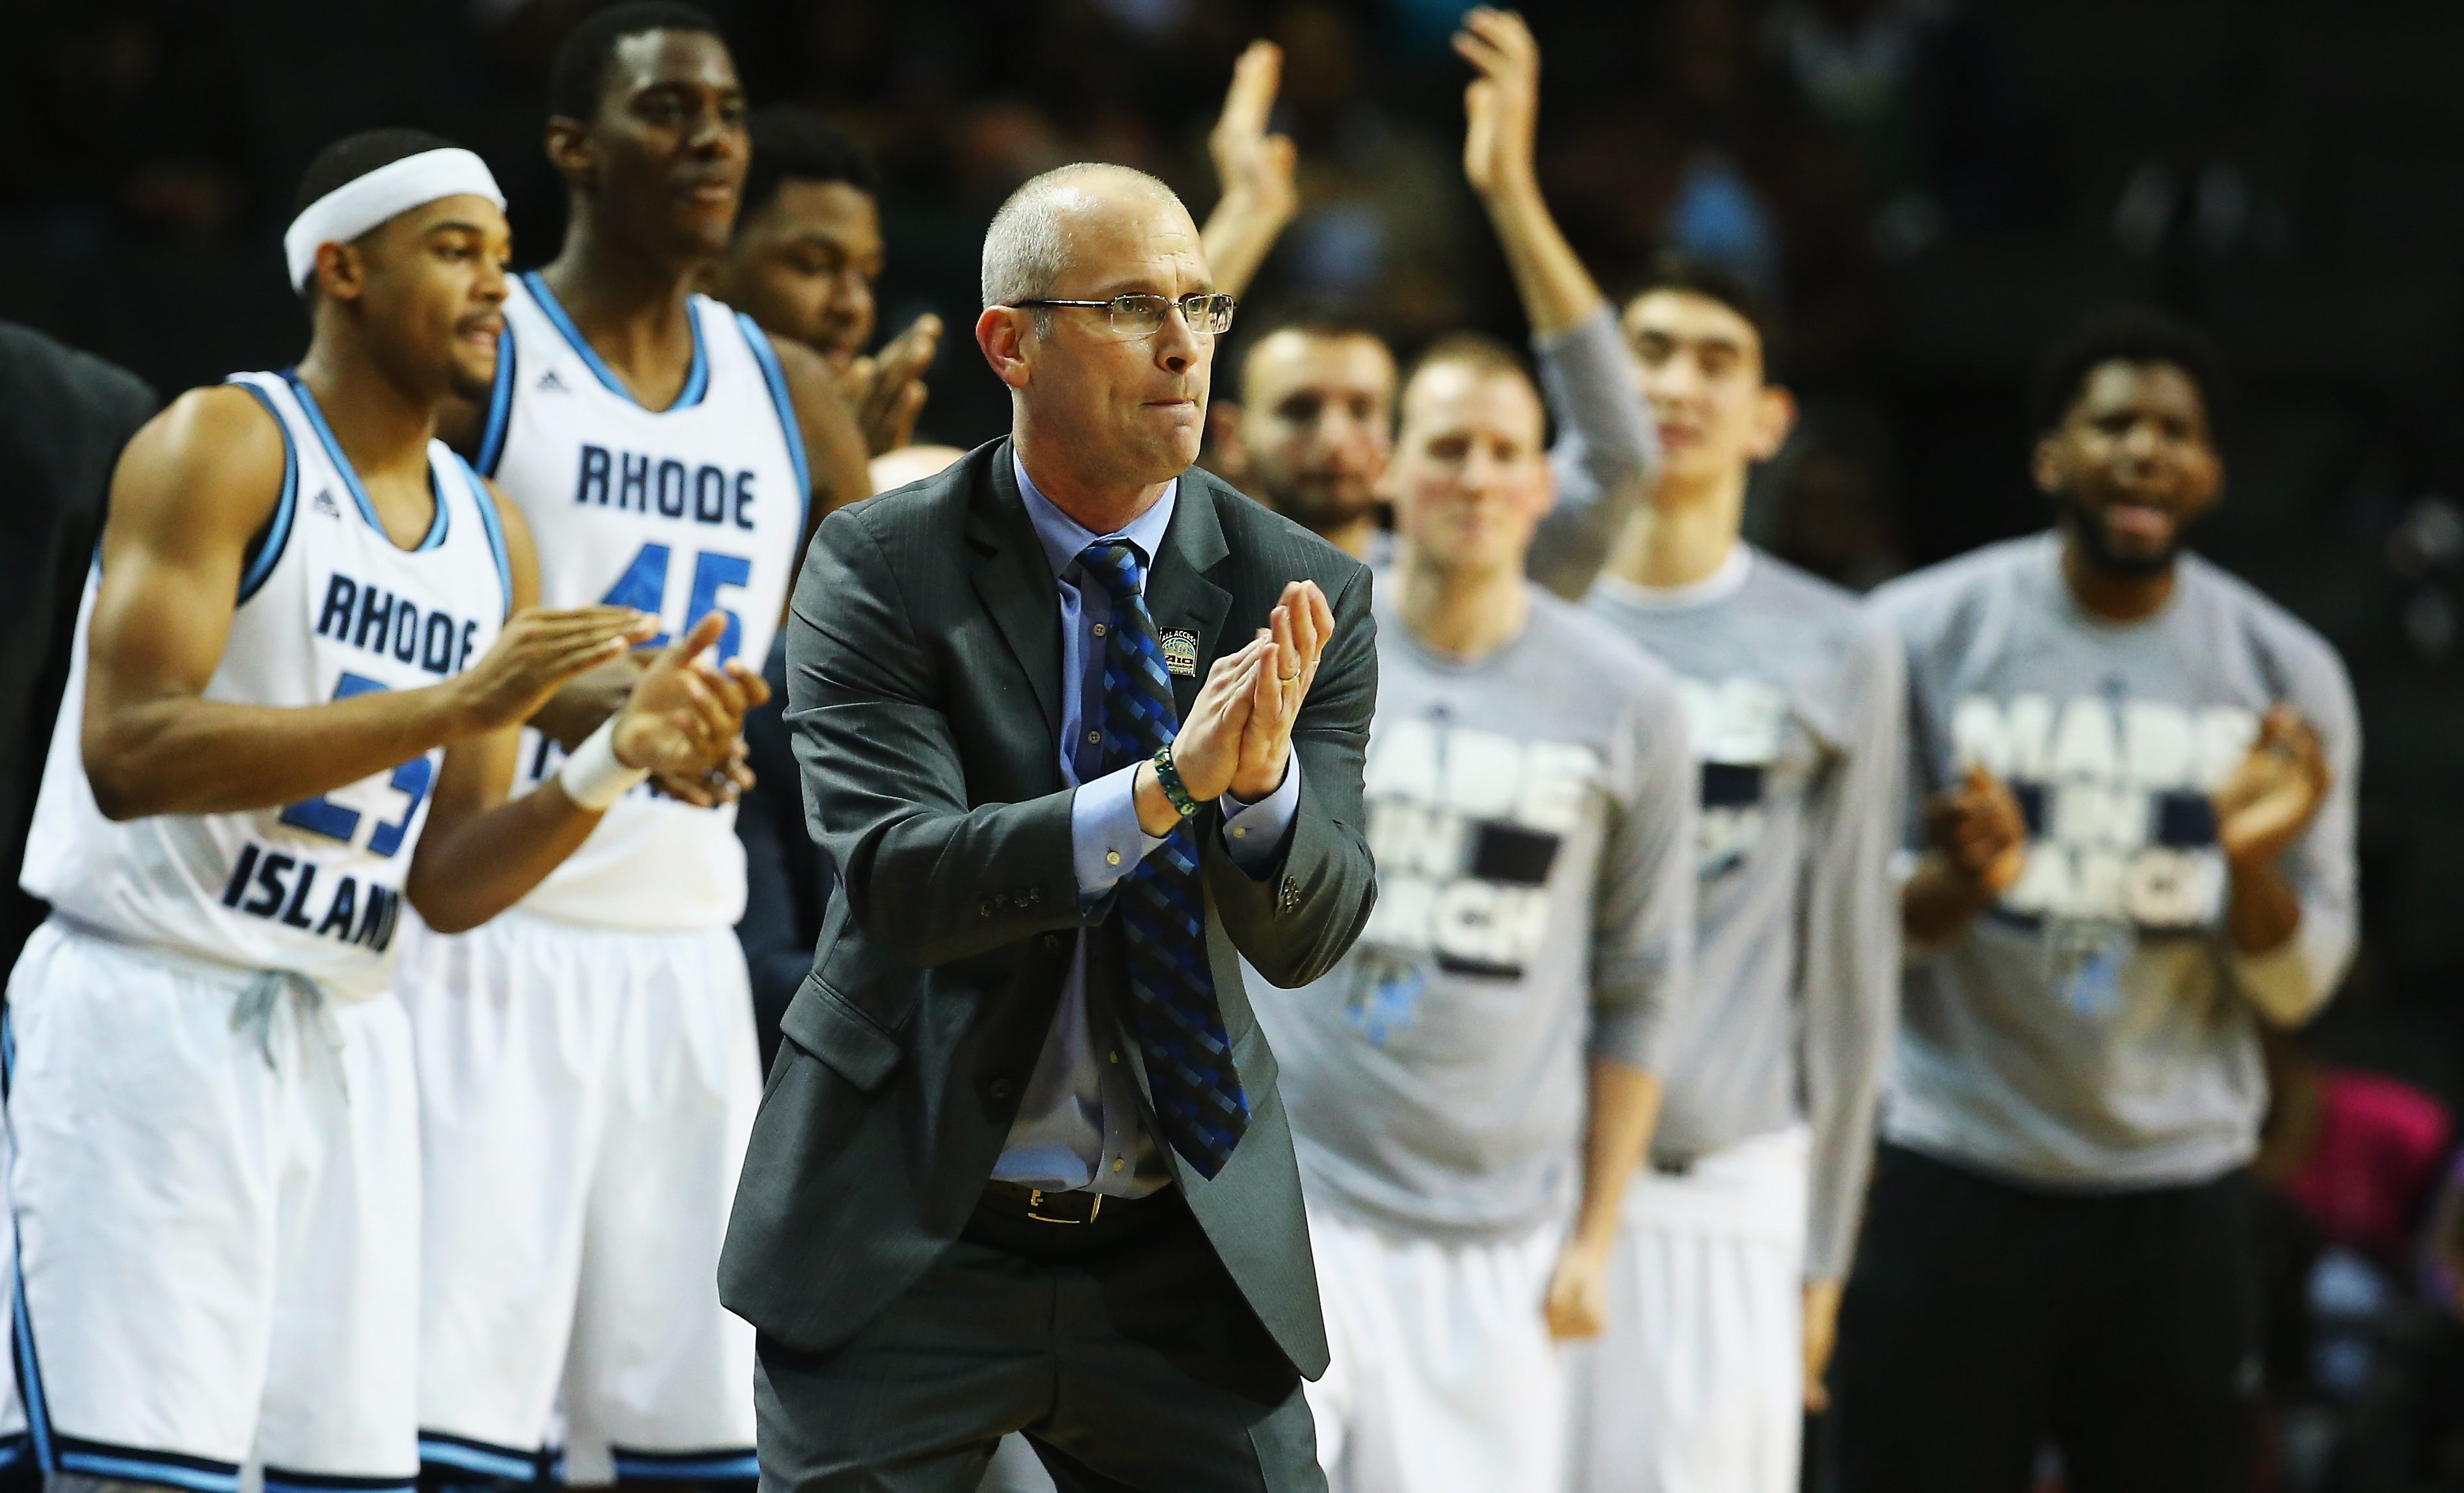 Hurley Brothers' Bond Deepens as Rhode Island Prepares for NCAA